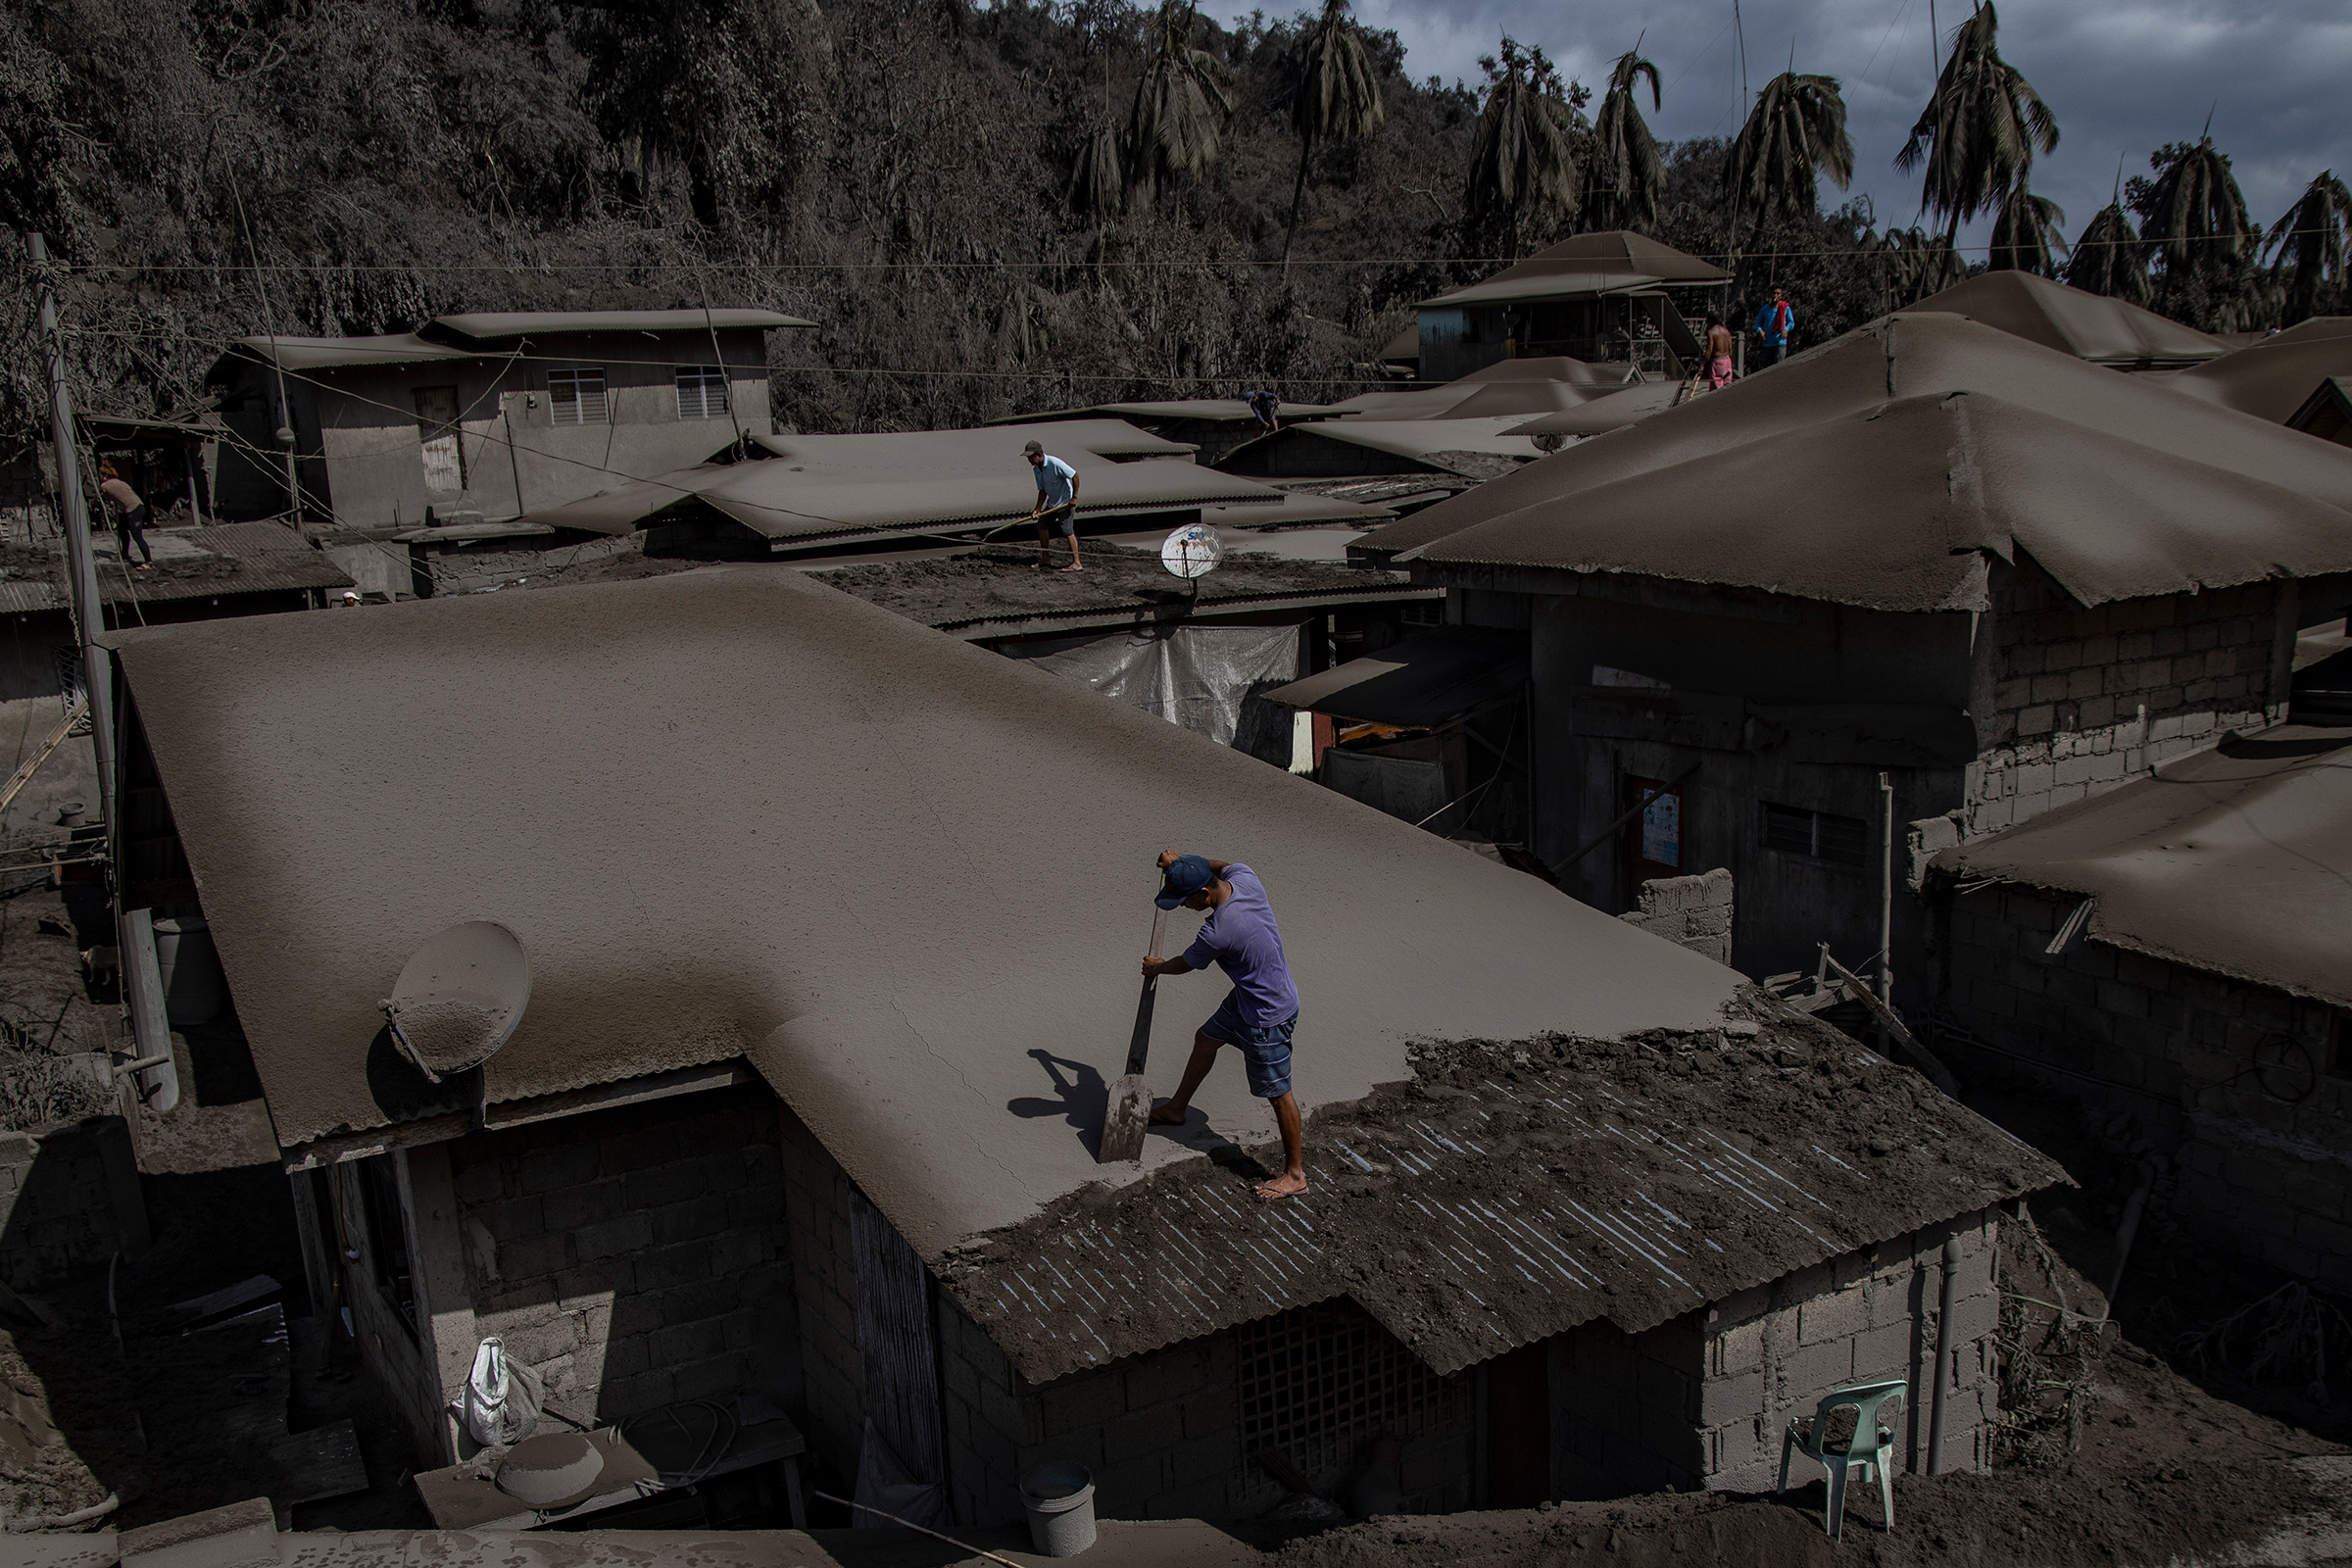 Men clean rooftops of ash from the recent eruption. (Ezra Acayan—Getty Images)